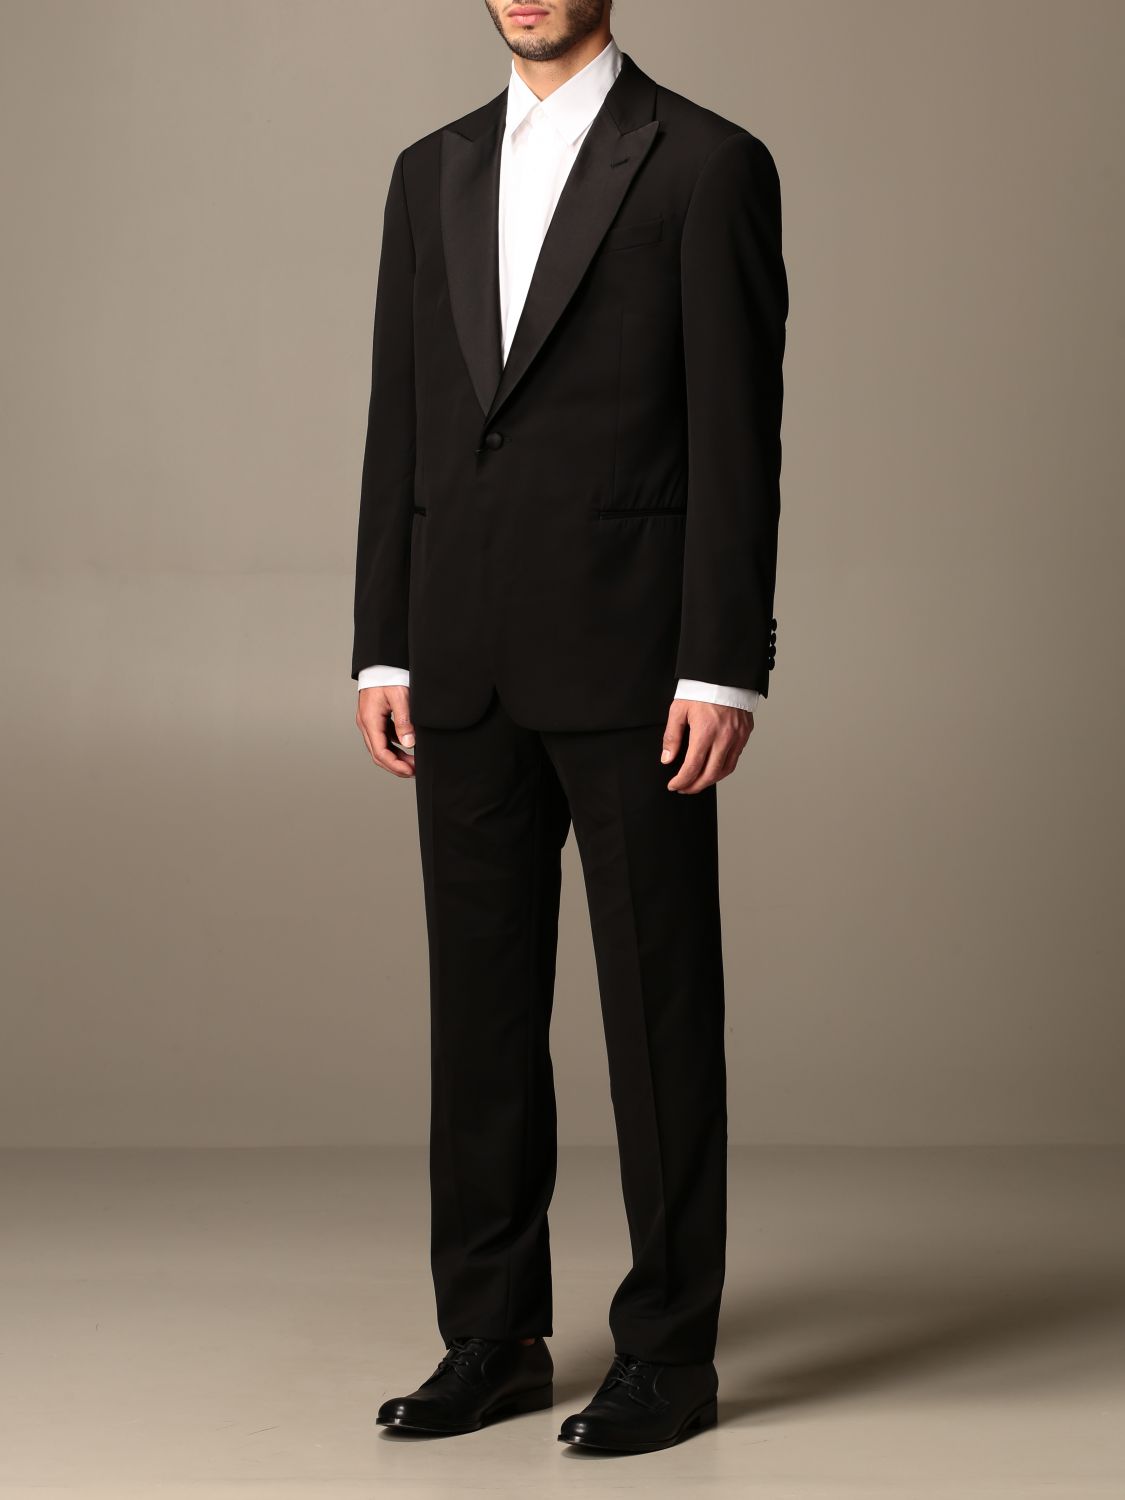 Giorgio Armani Outlet: tuxedo suit in virgin wool - Black | Suit ...